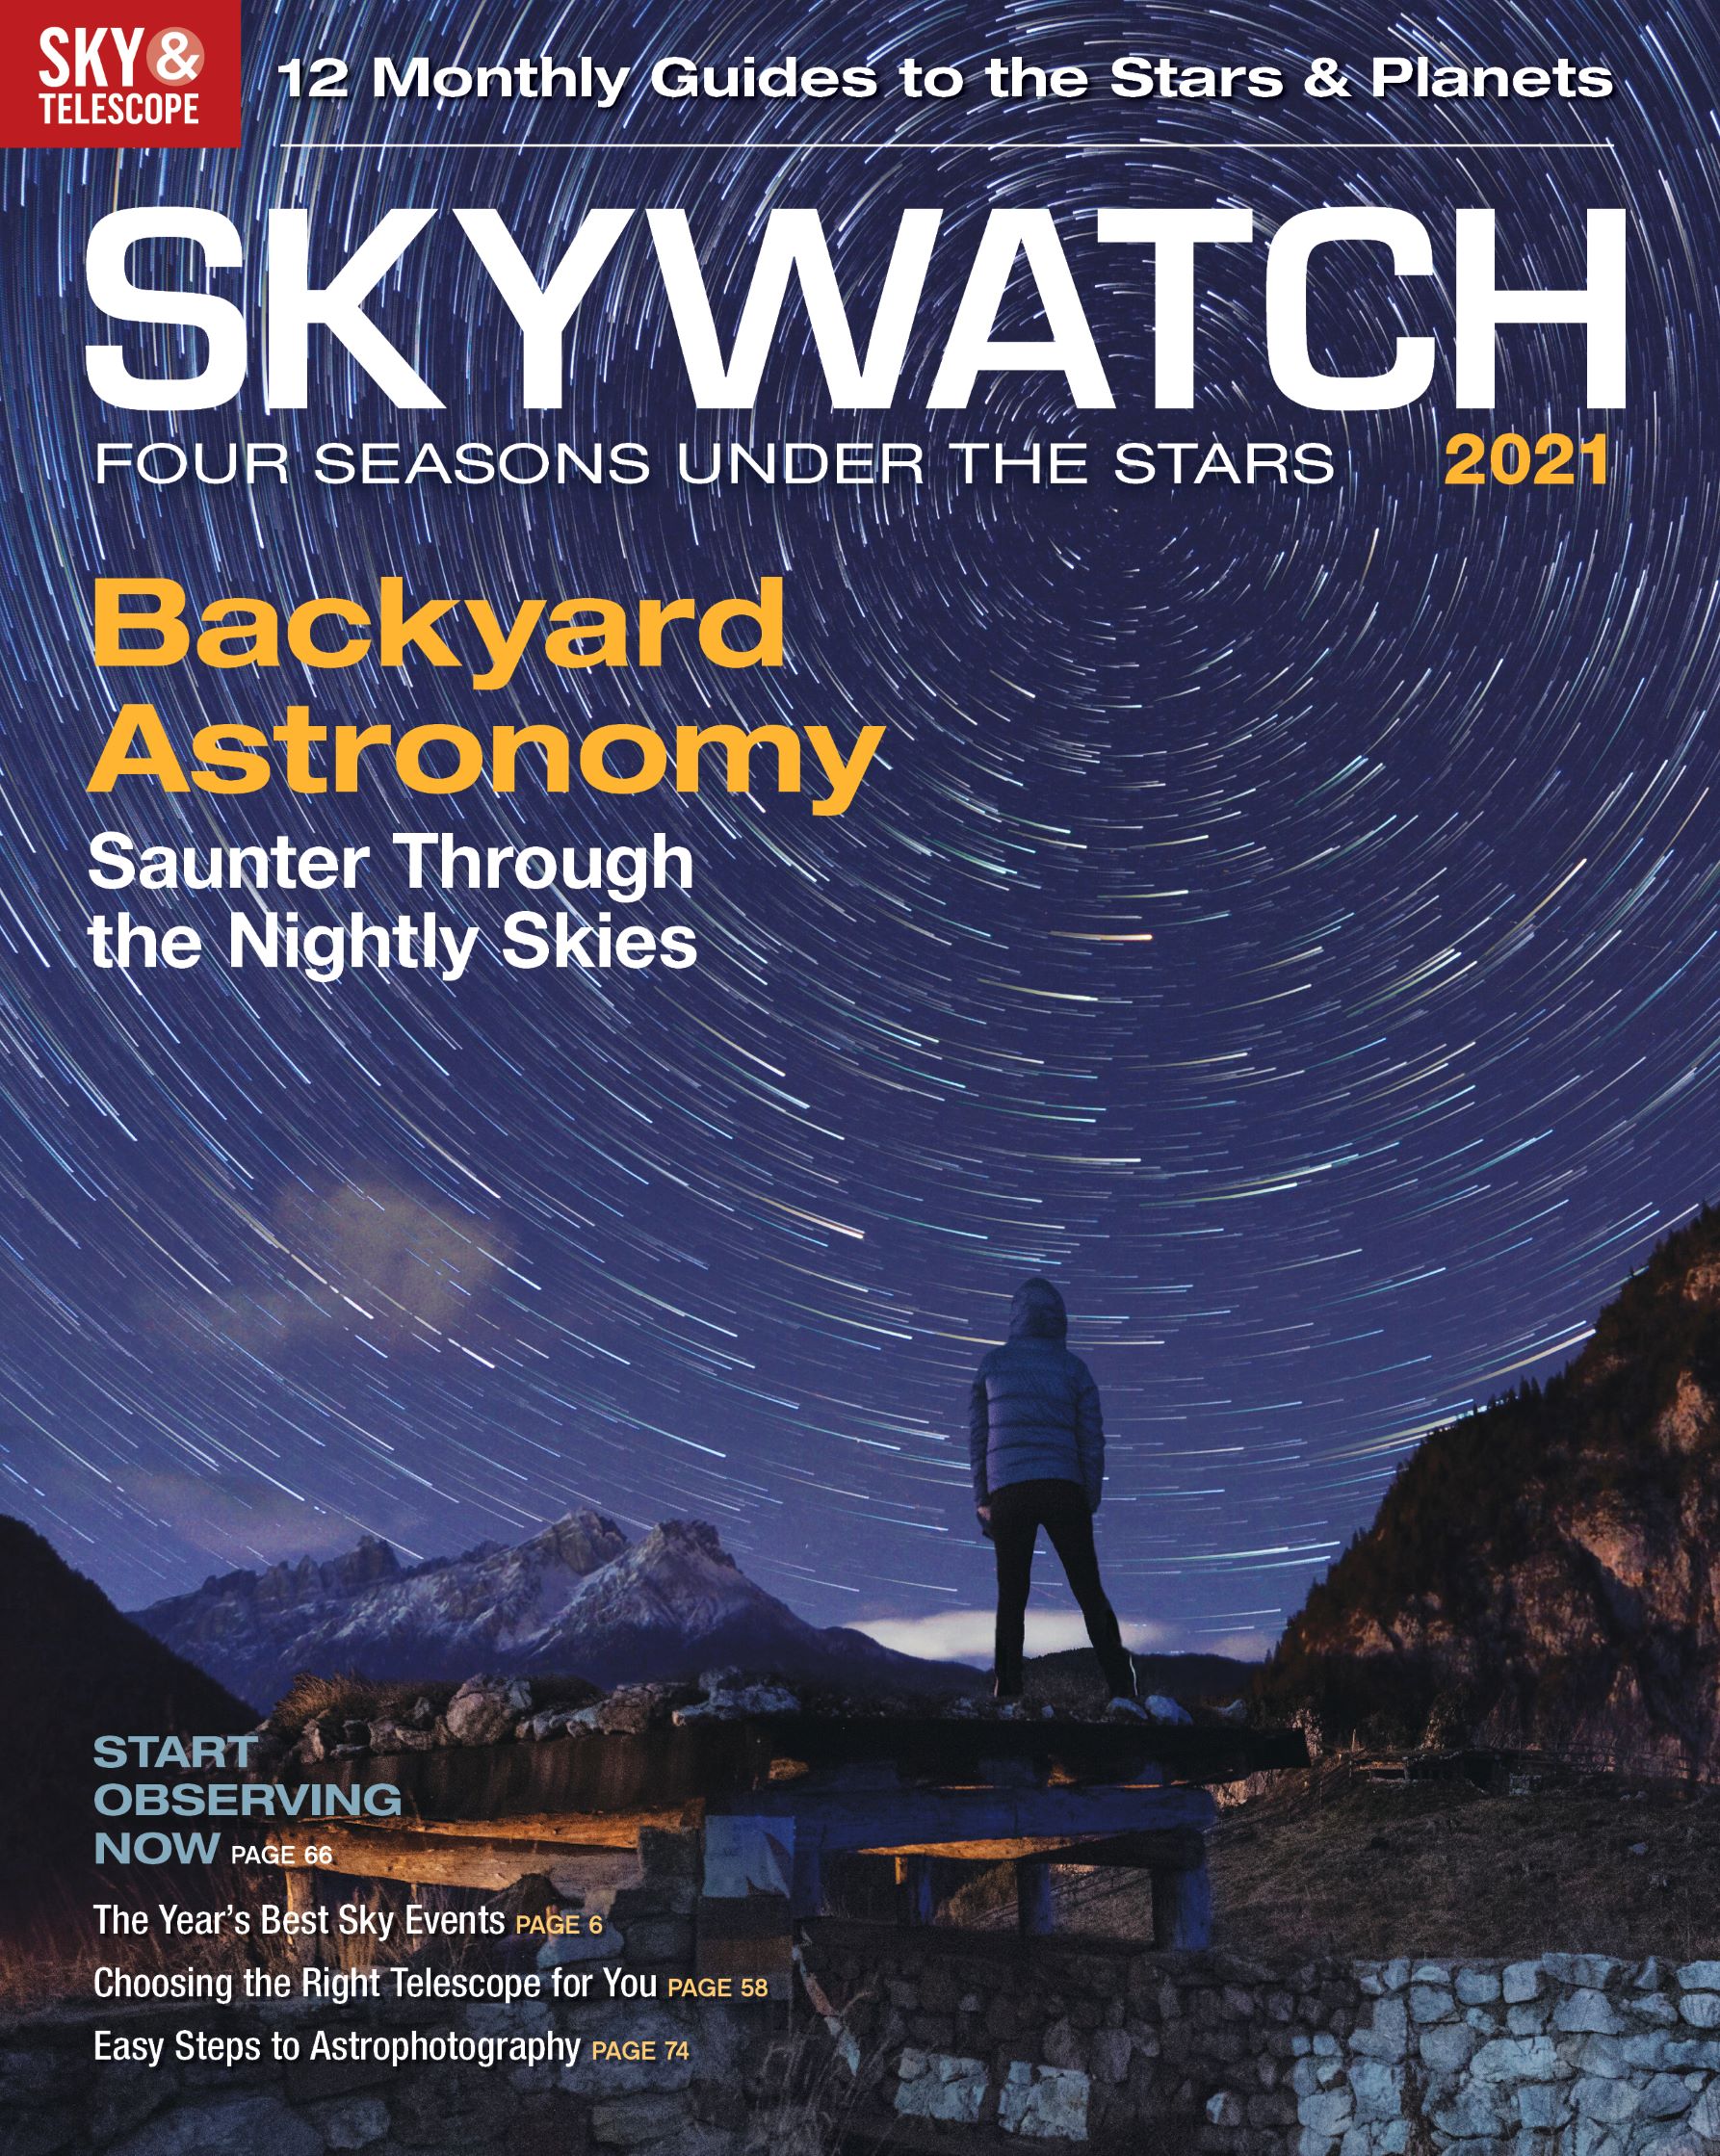 SkyWatch 2021 Is Here